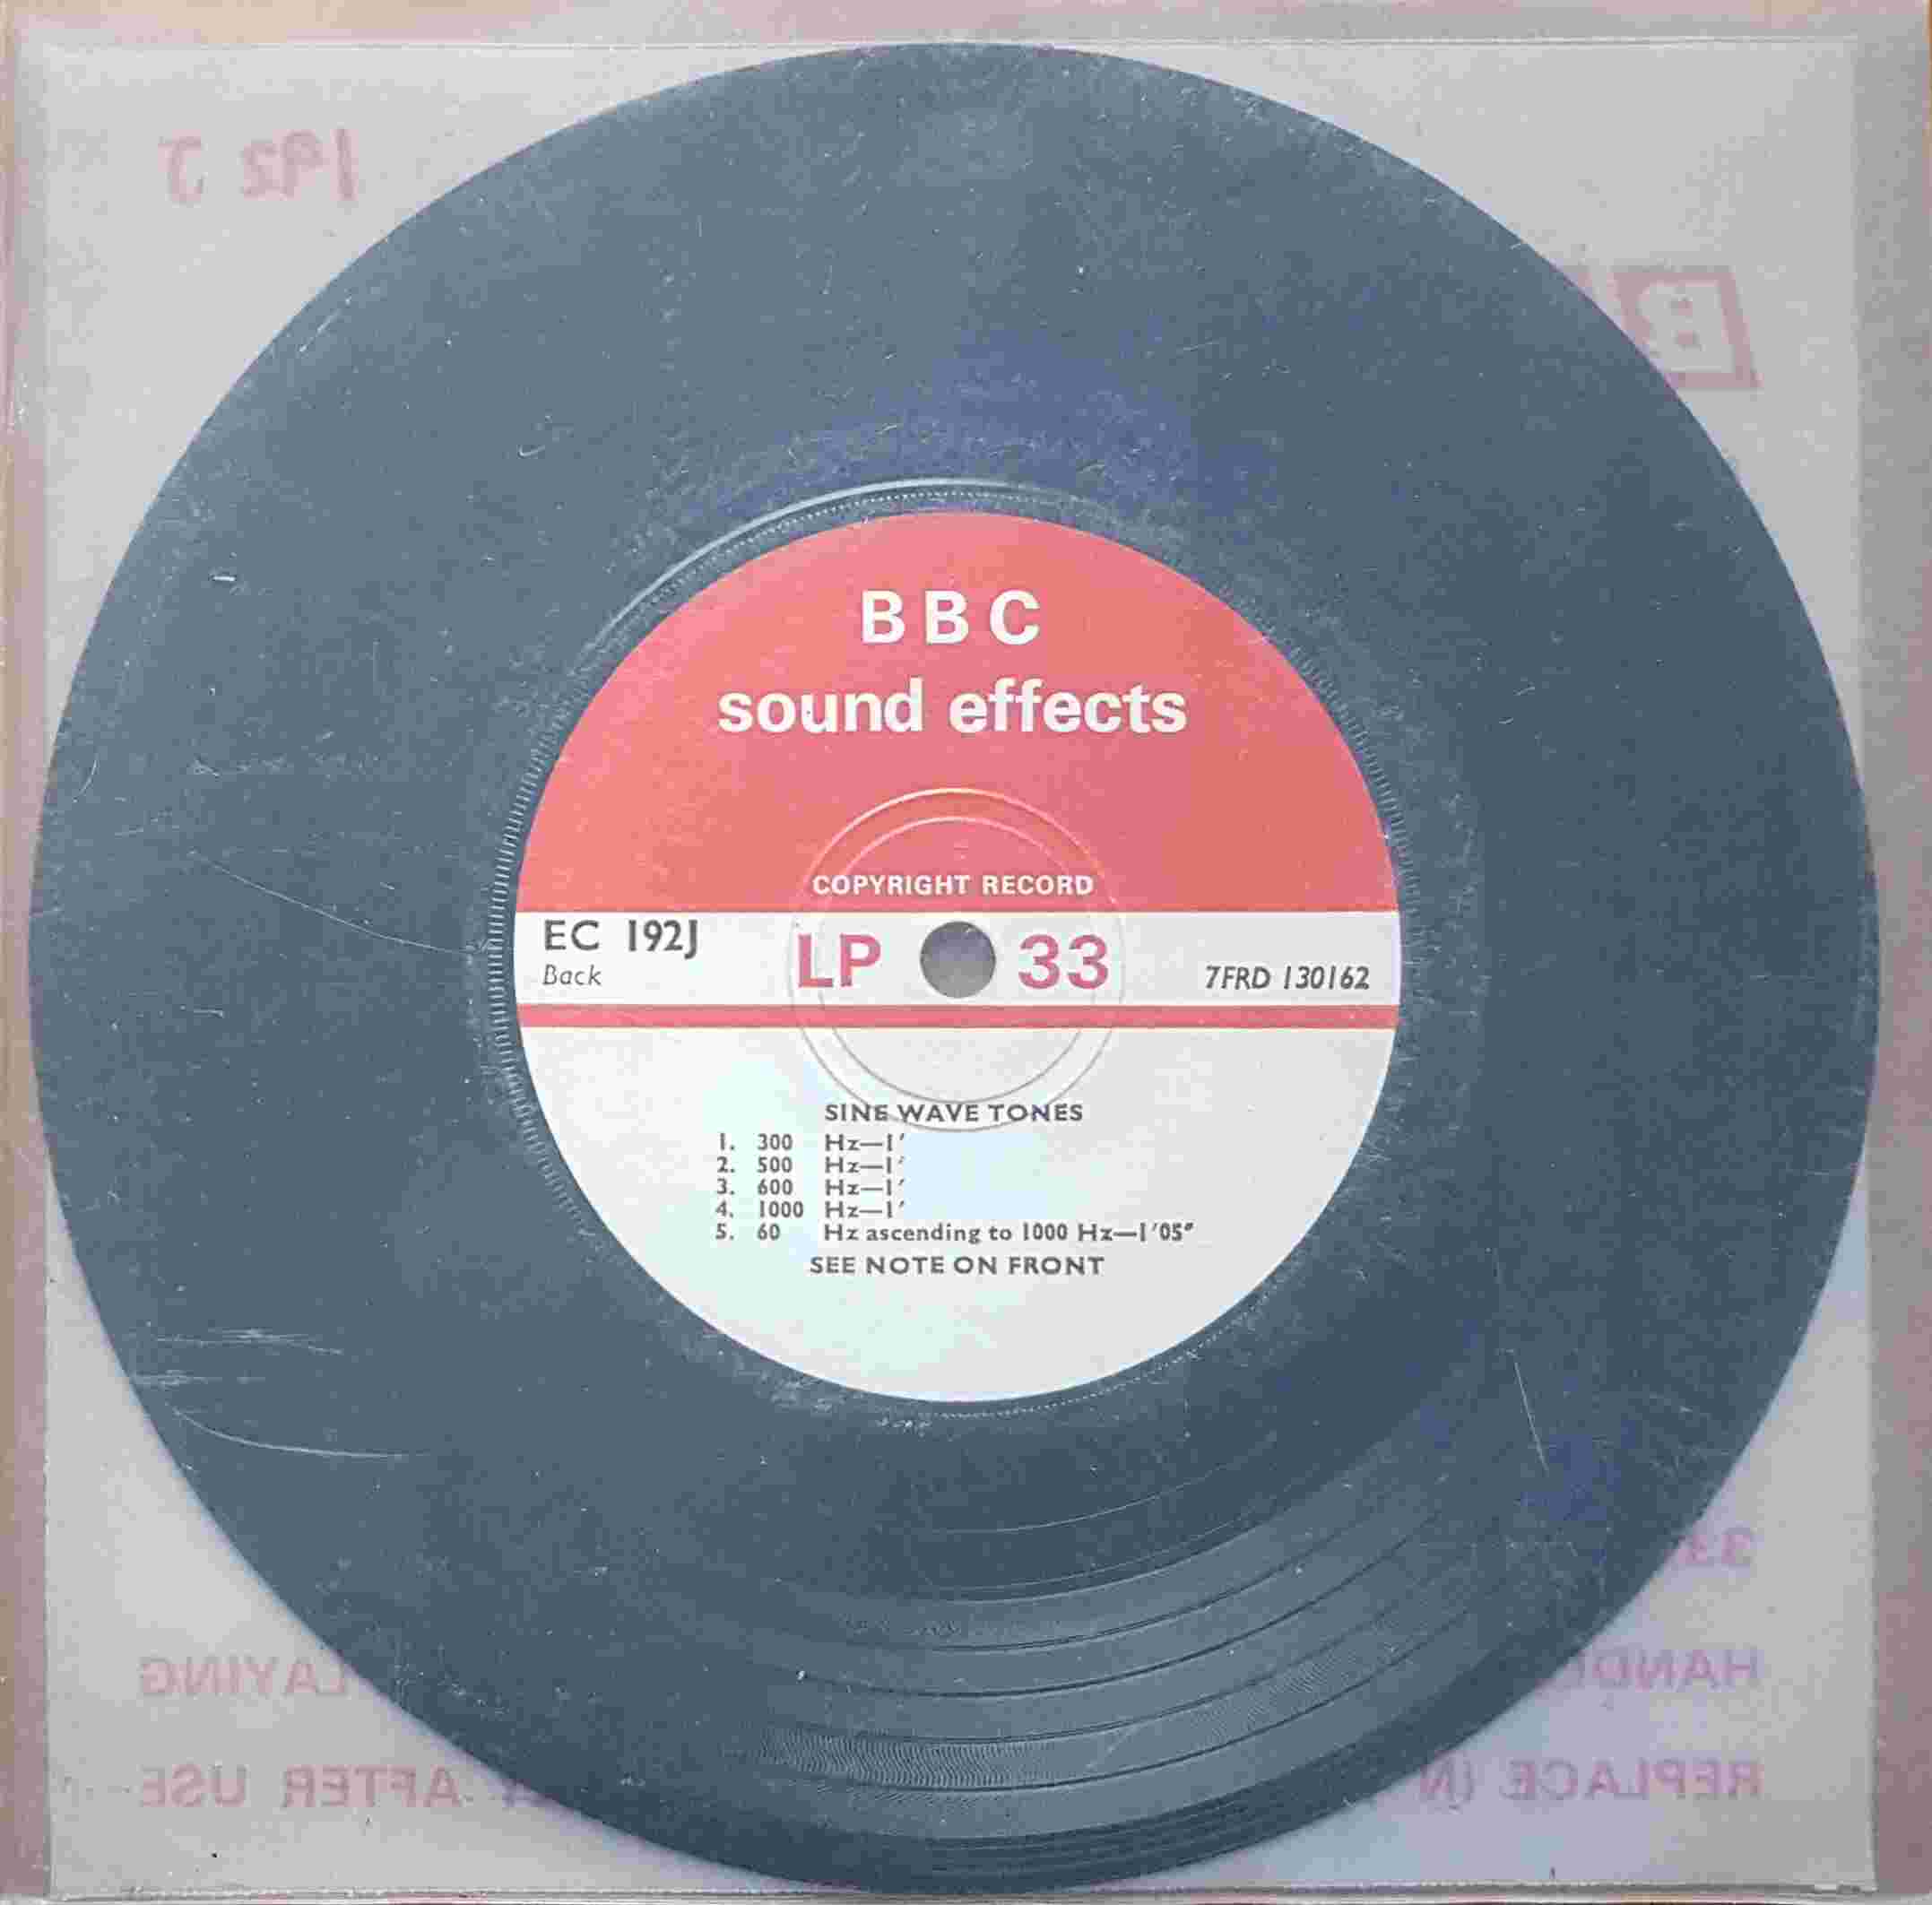 Picture of EC 192J Sine waves tones by artist Not registered from the BBC records and Tapes library